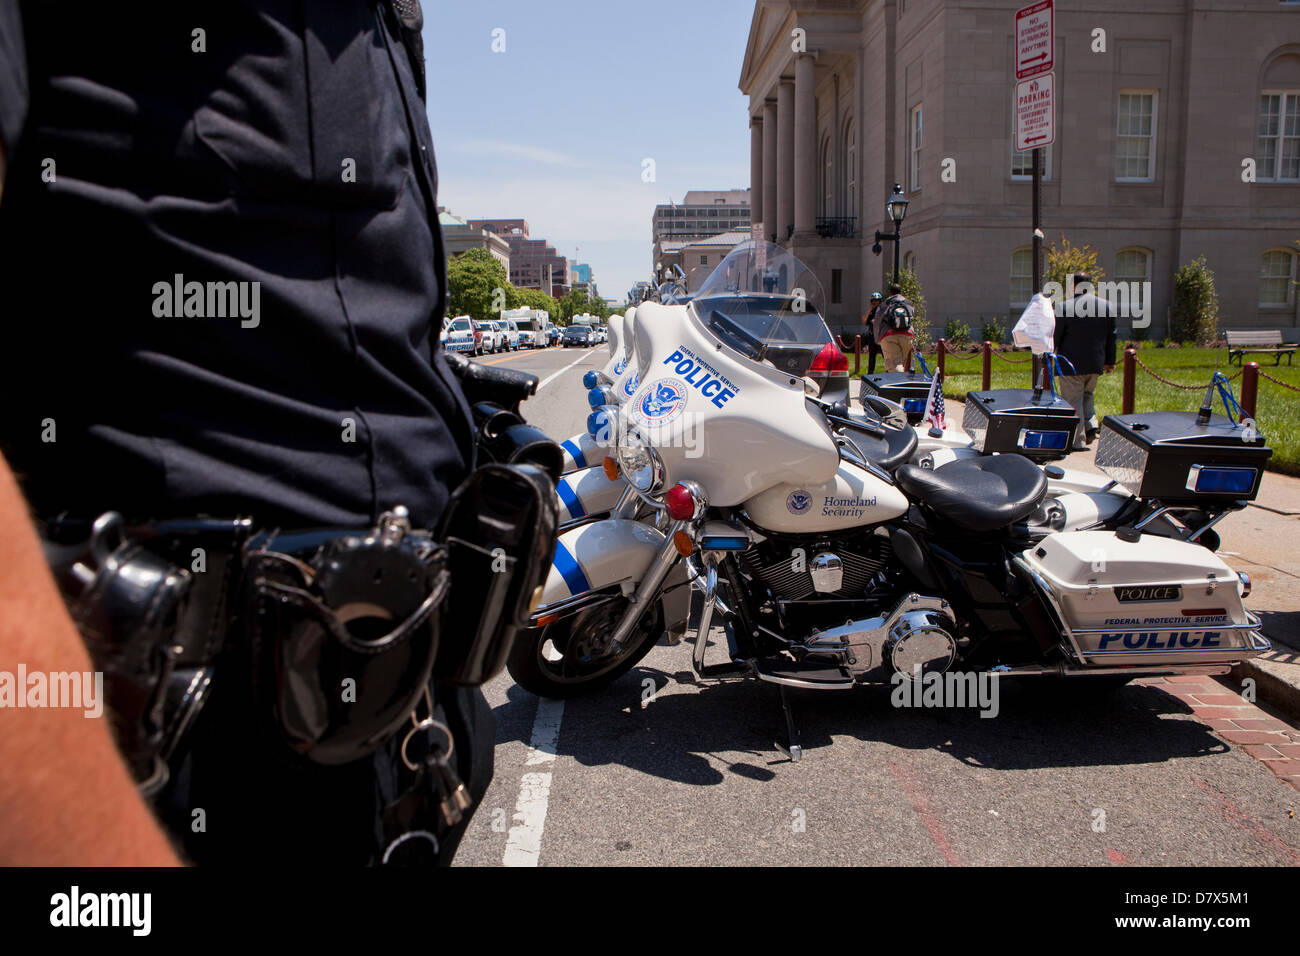 US Department of Homeland Security Federal Protective Service Police officer standing next to service motorcycle - Washington, DC USA Stock Photo